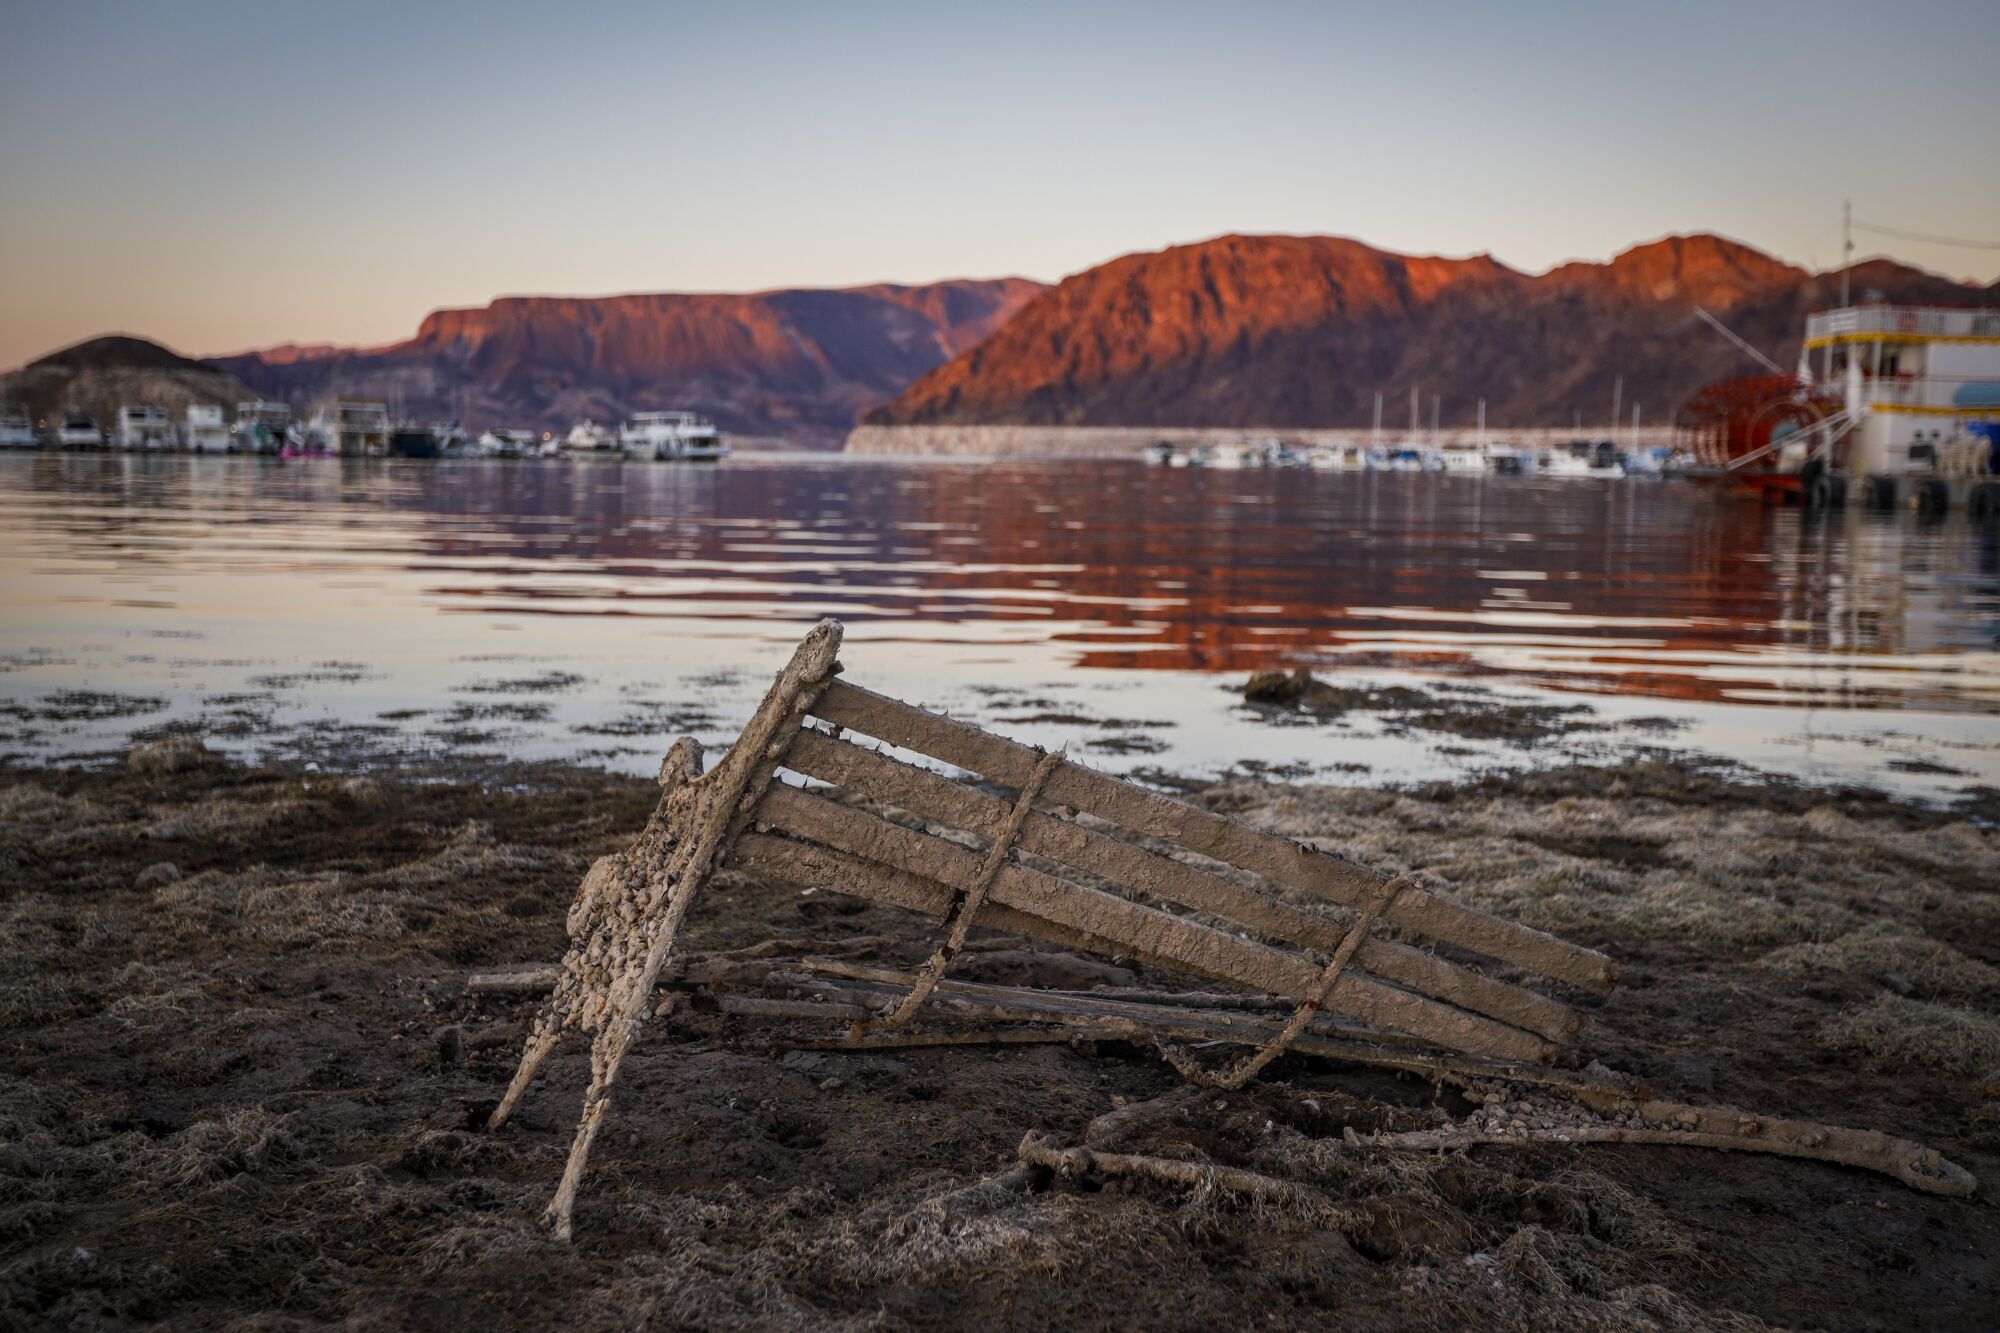 A formerly sunken bench rests on the shore near the Hemenway Harbor launch ramp on Lake Mead in Nevada.